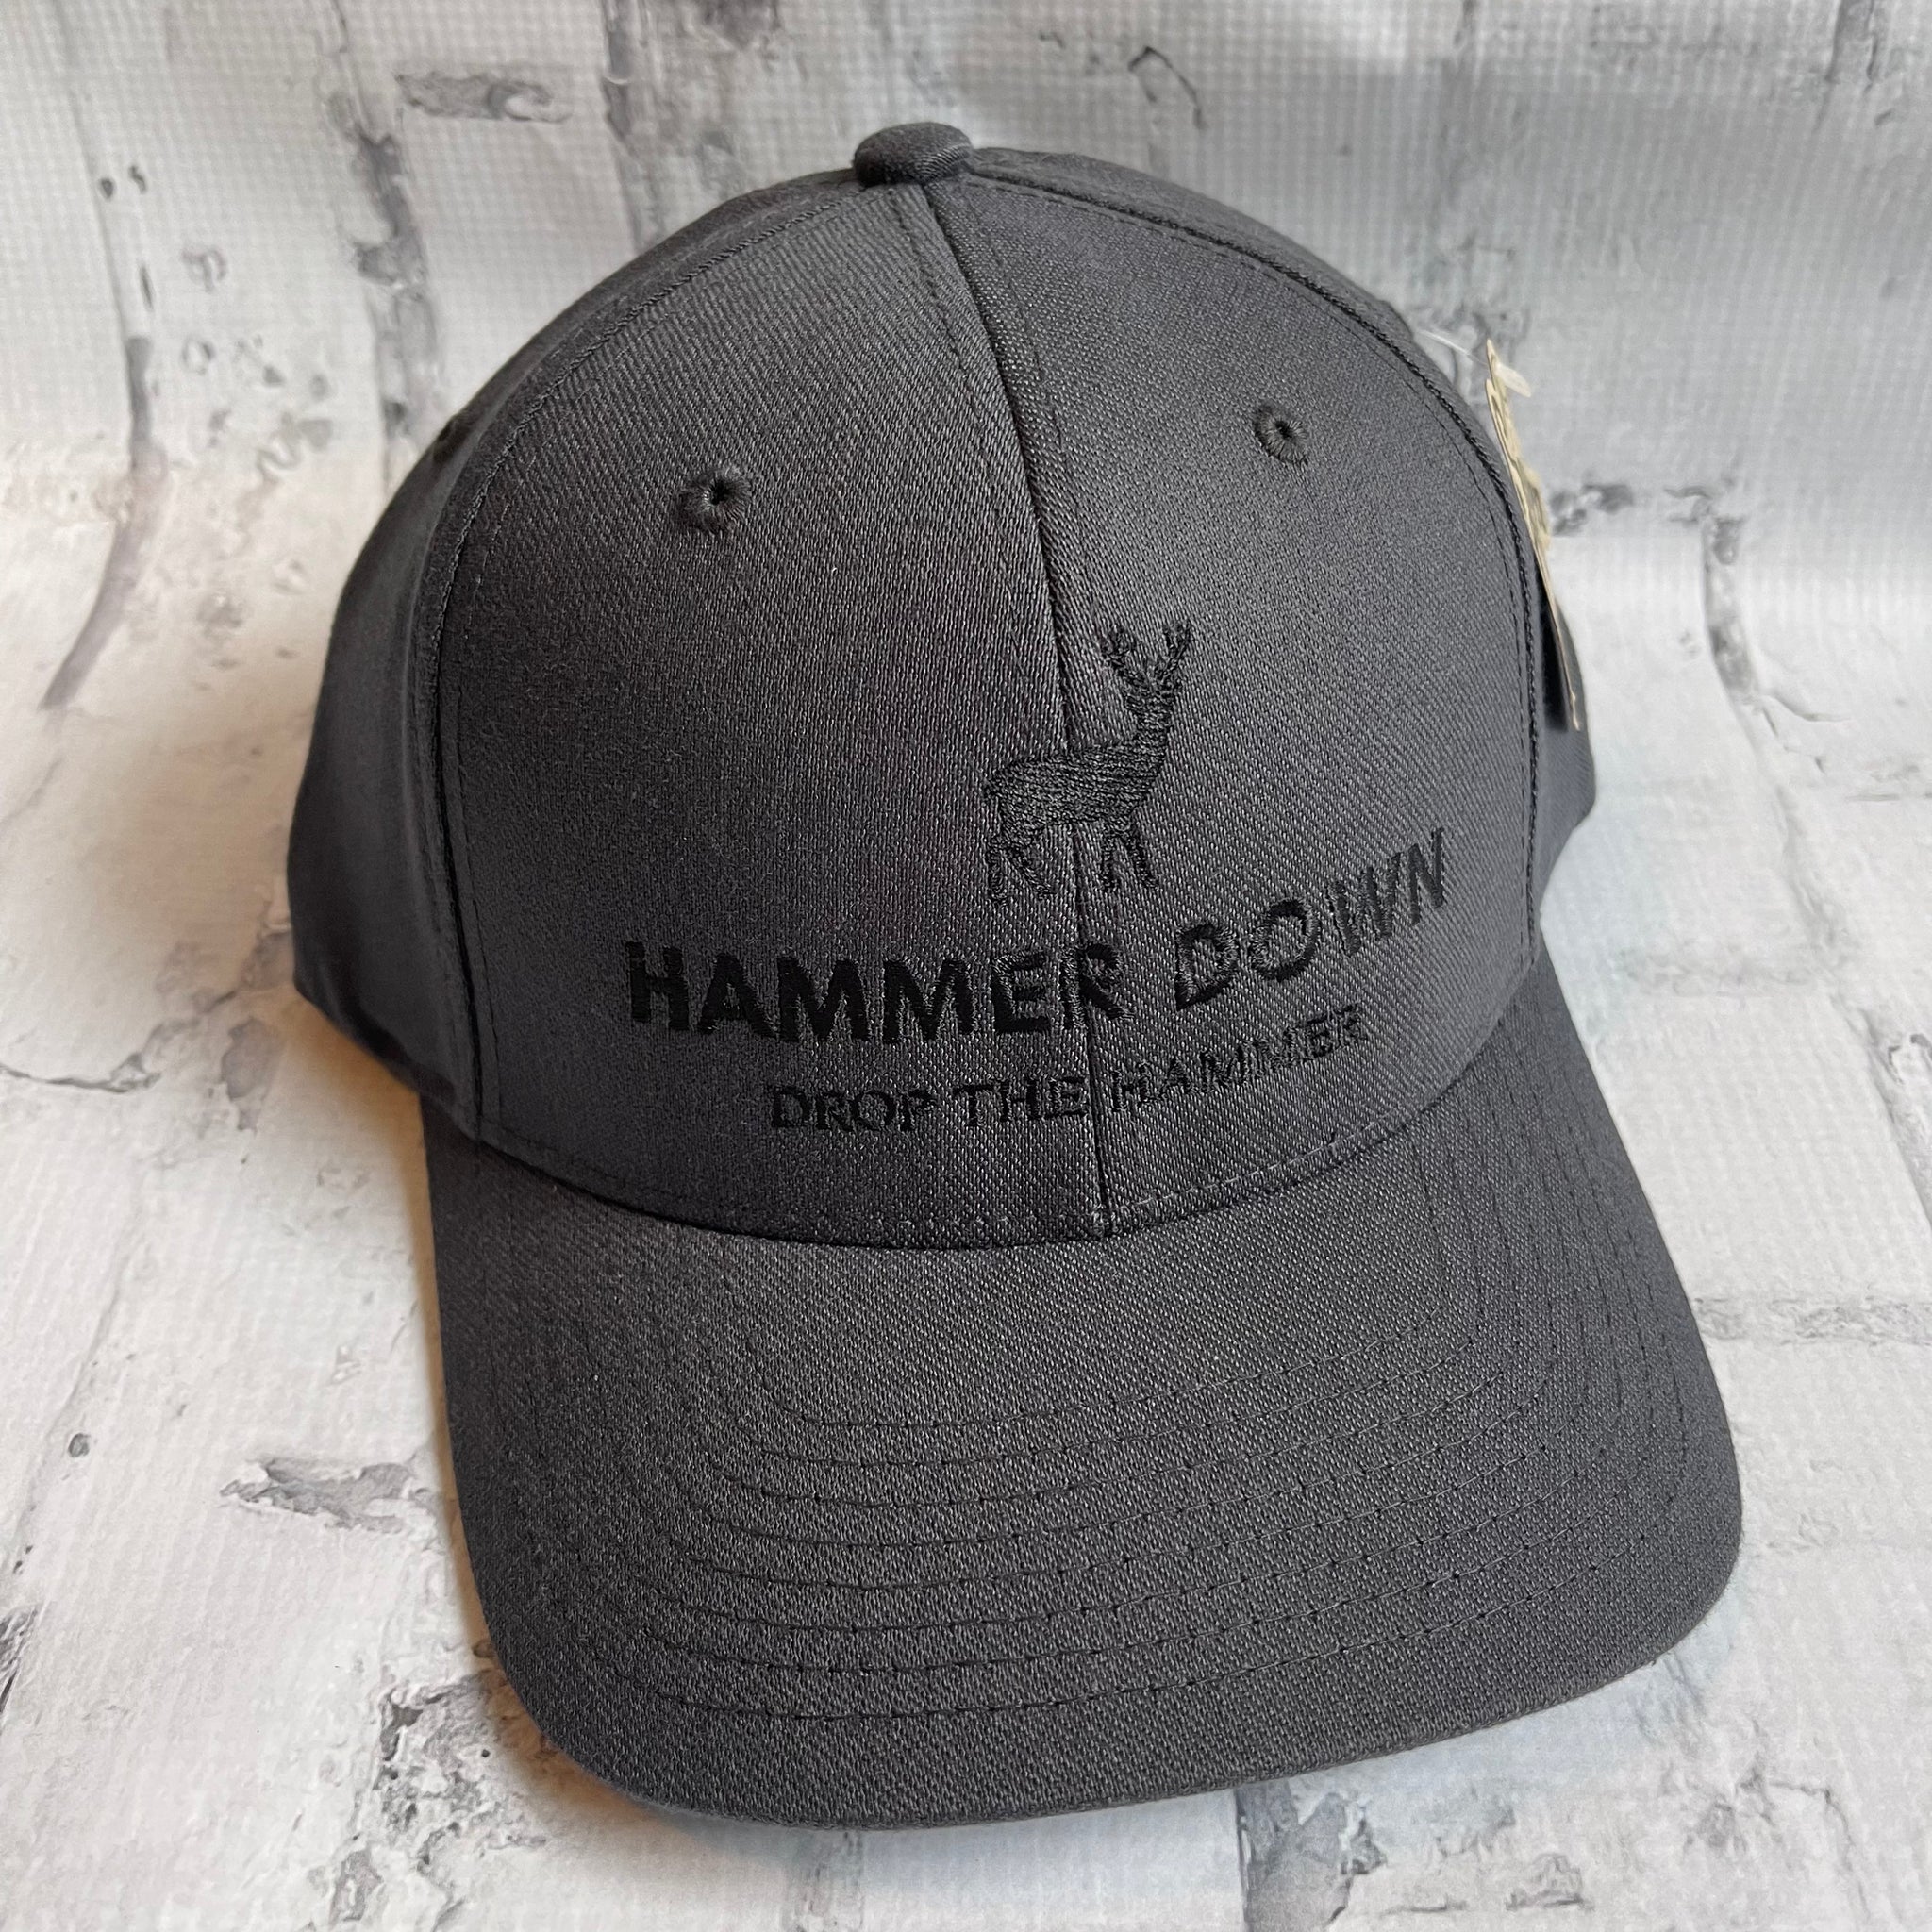 Hammer Down "Black DTH Deer" Flex Fit Hat - Charcoal with Woven Patch - Southern Charm "Shop The Charm"